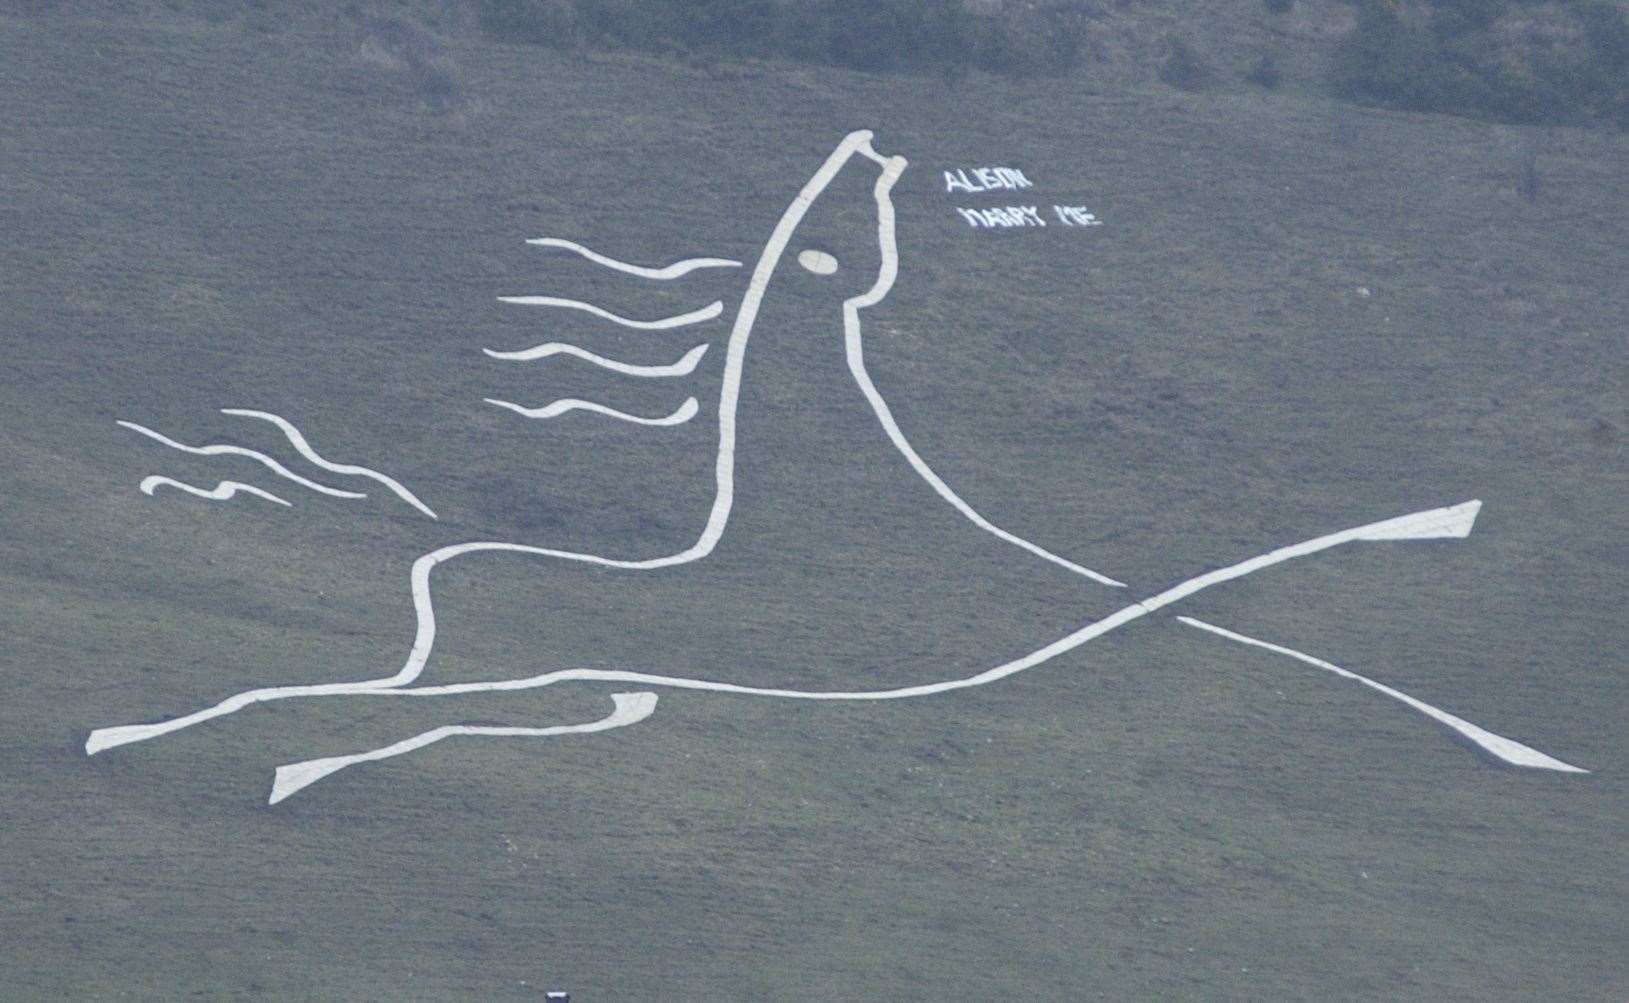 The 'Alison marry me' message on the hillside at Christmas in 2003 - and she said yes! In November that year, efforts to turn the image into a fire-breathing beast were quickly scuppered after two red barrels placed near the horse's nose - to make it look as though it was breathing fire - were removed